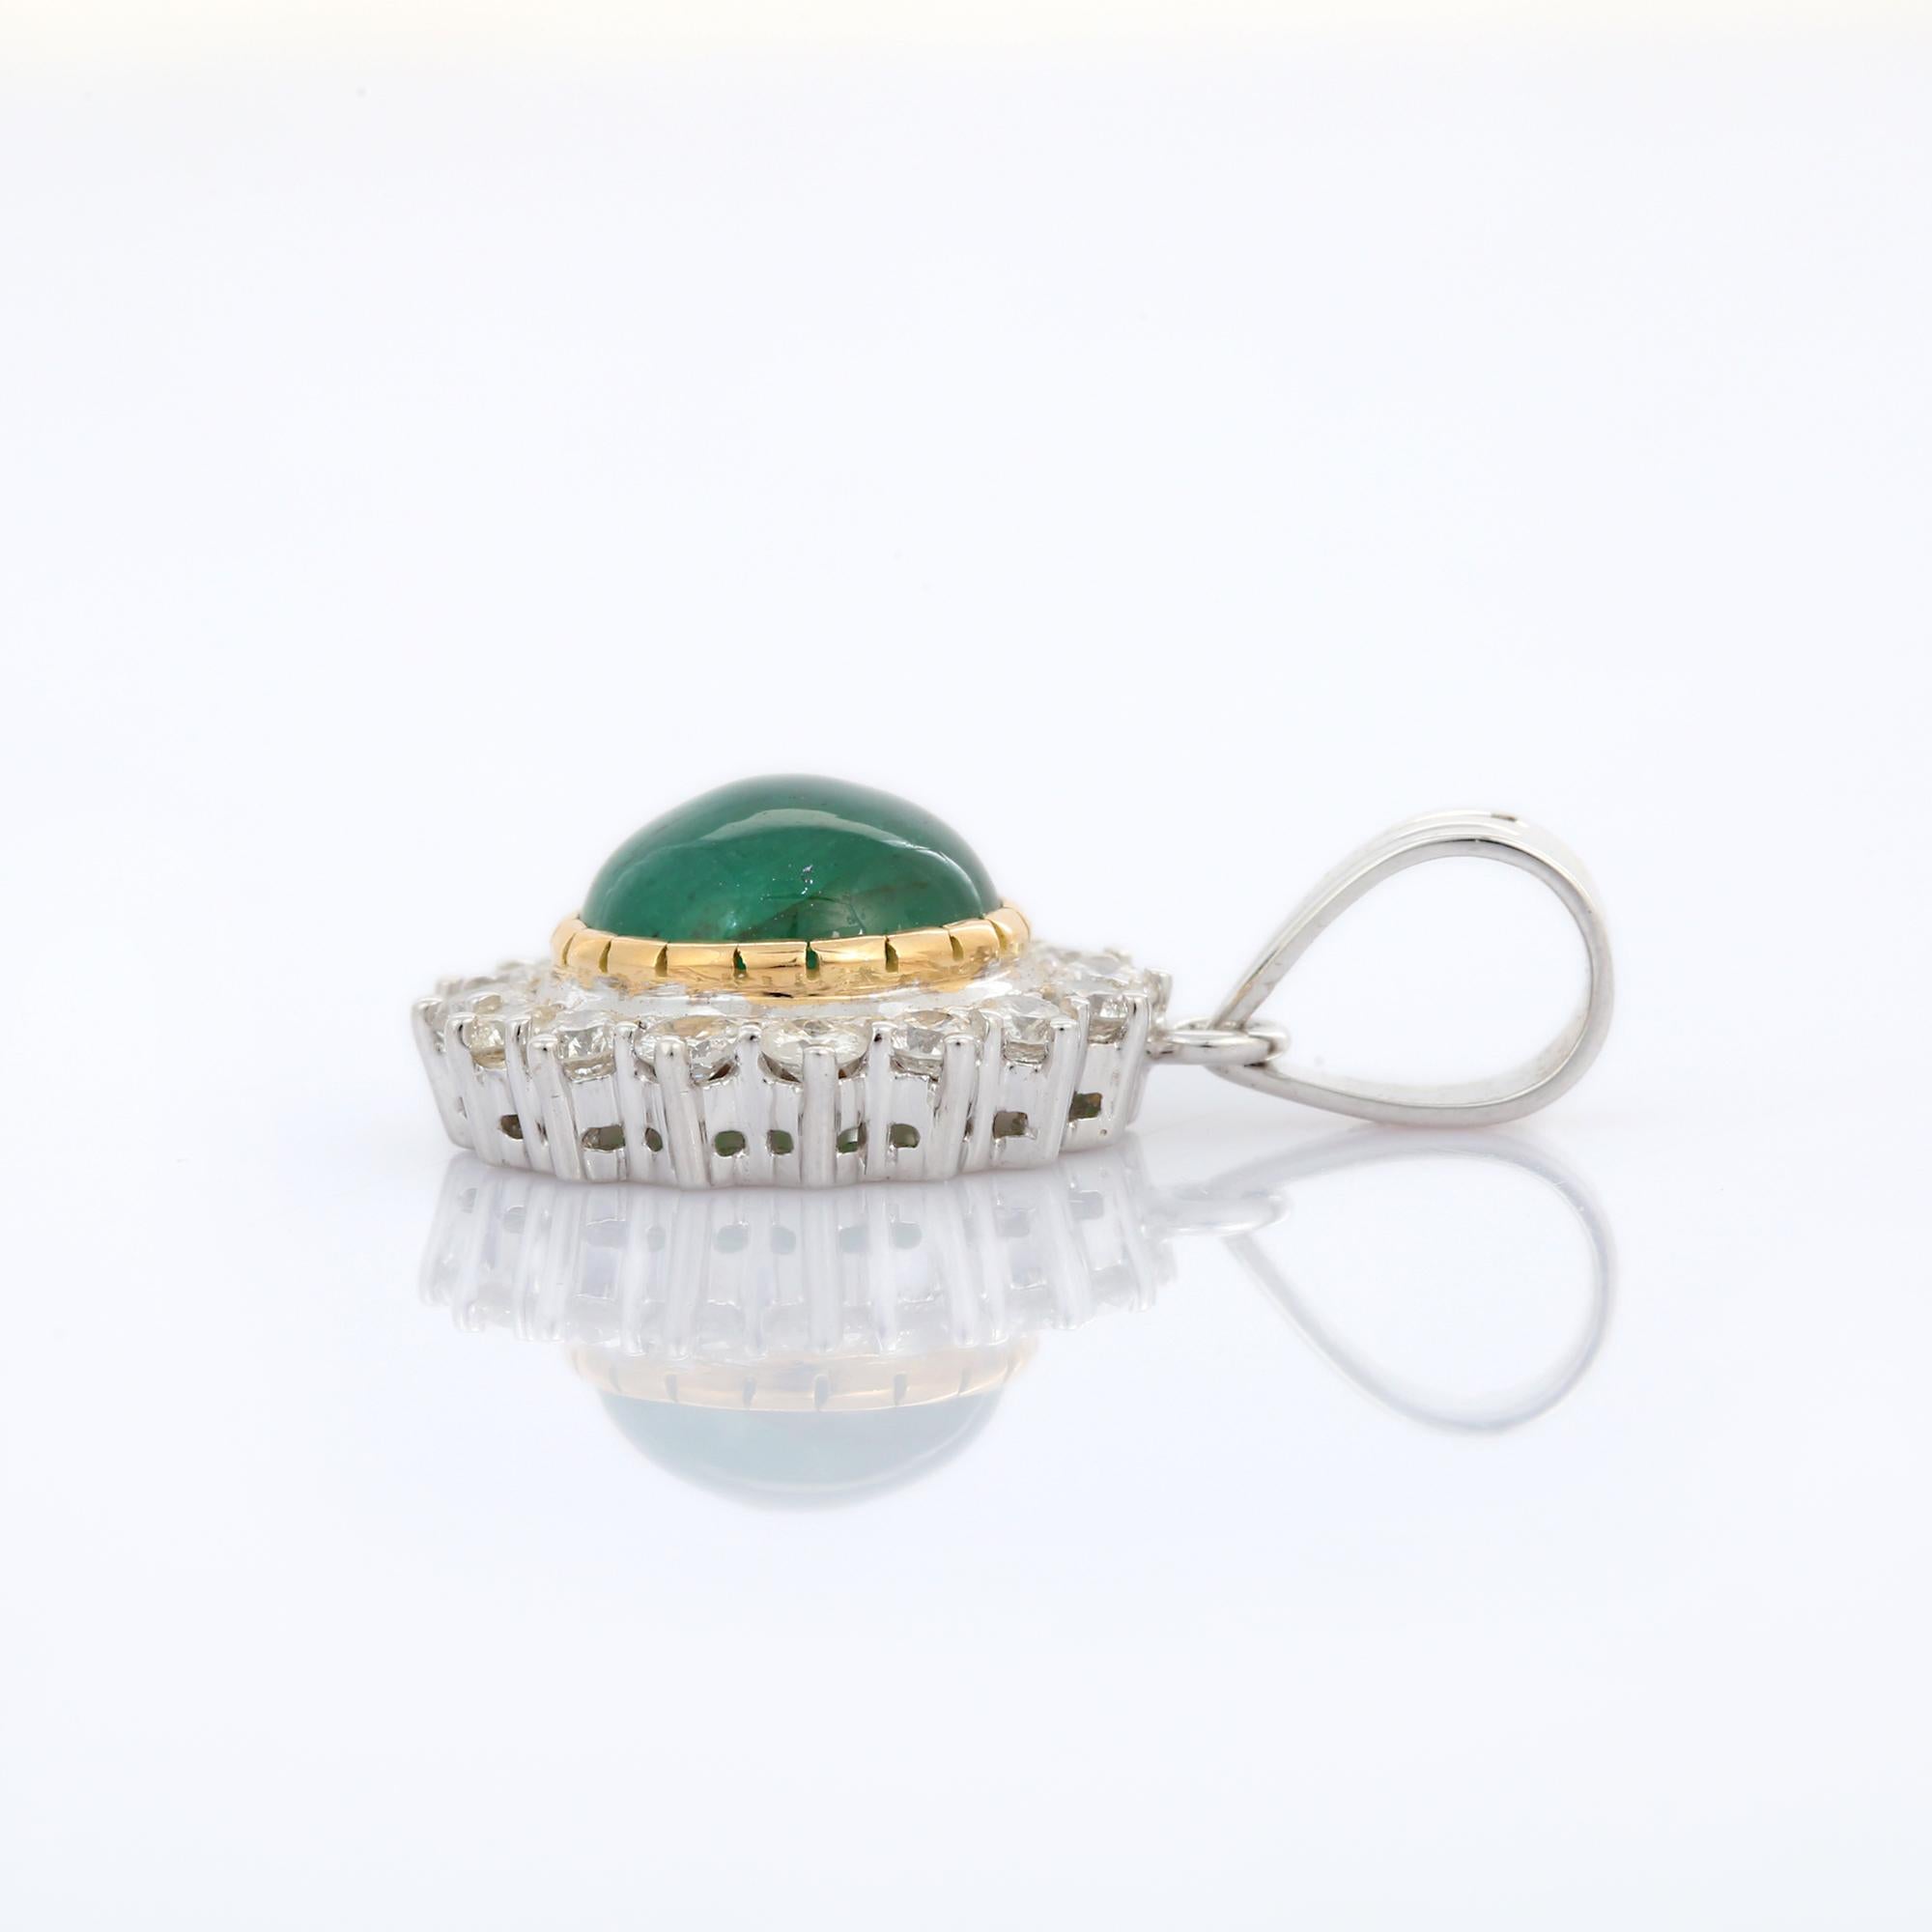 Natural Emerald pendant in 18K Gold. It has a round cut emerald studded with diamonds that completes your look with a decent touch. Pendants are used to wear or gifted to represent love and promises. It's an attractive jewelry piece that goes with